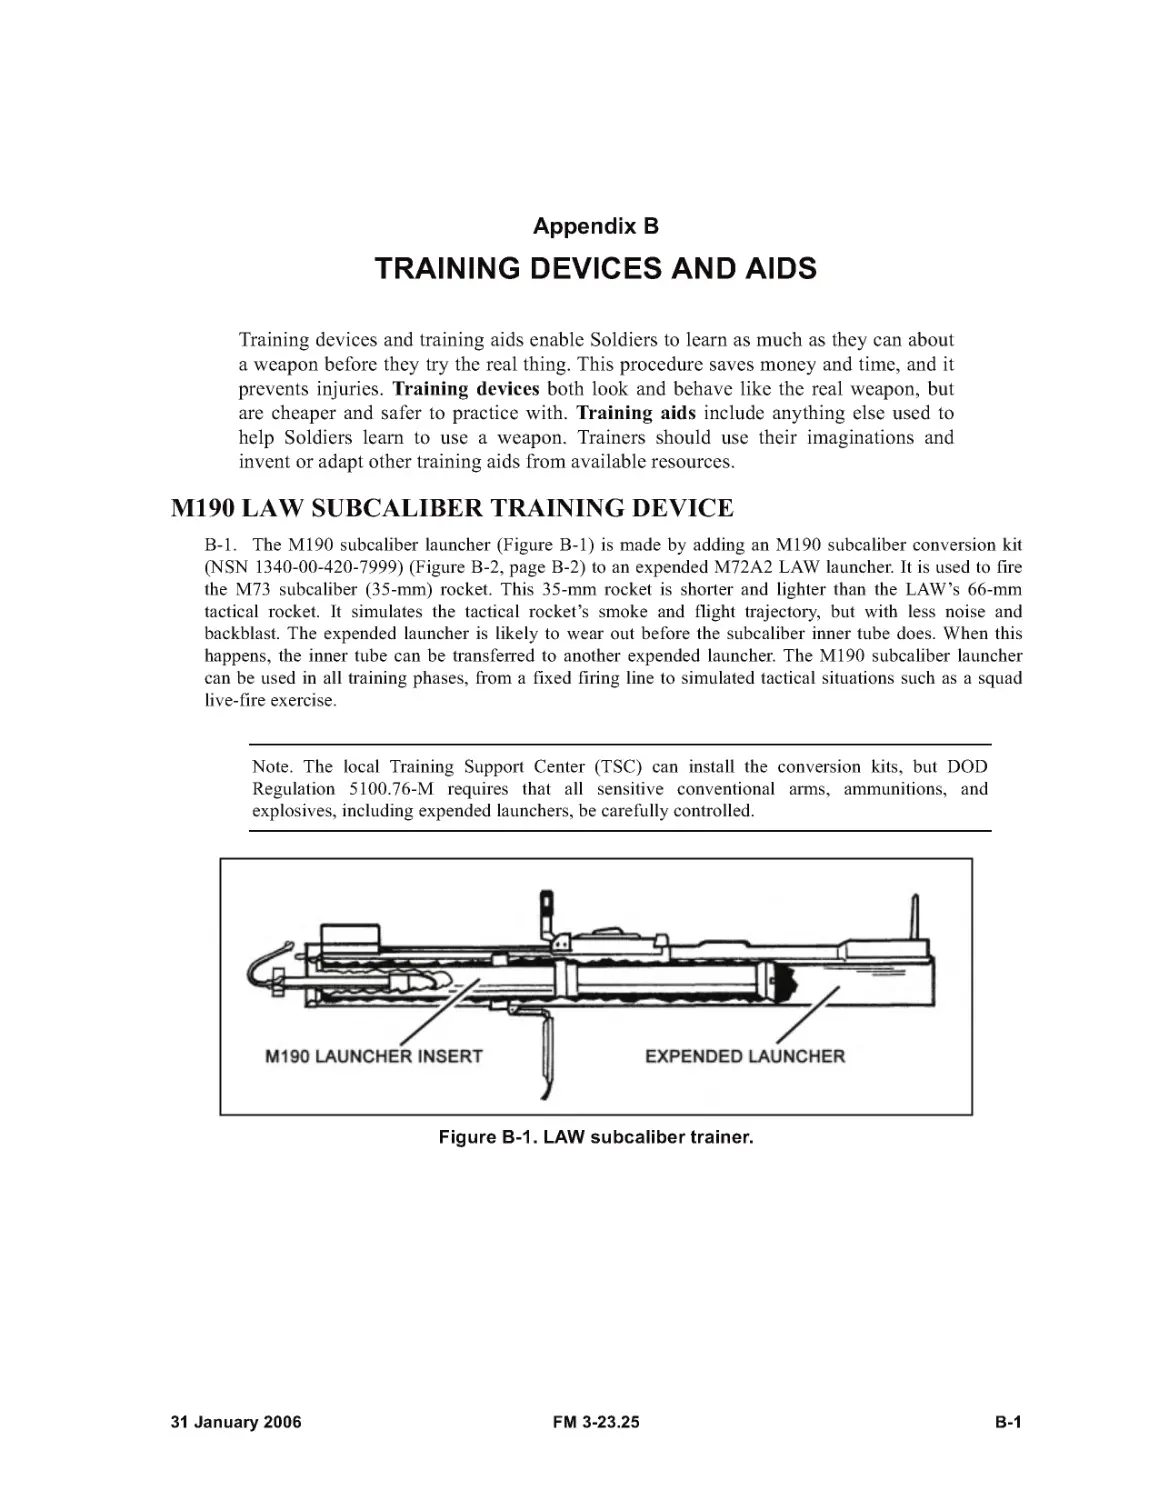 Figure B-1. LAW subcaliber trainer.
Appendix B - TRAINING DEVICES AND AIDS